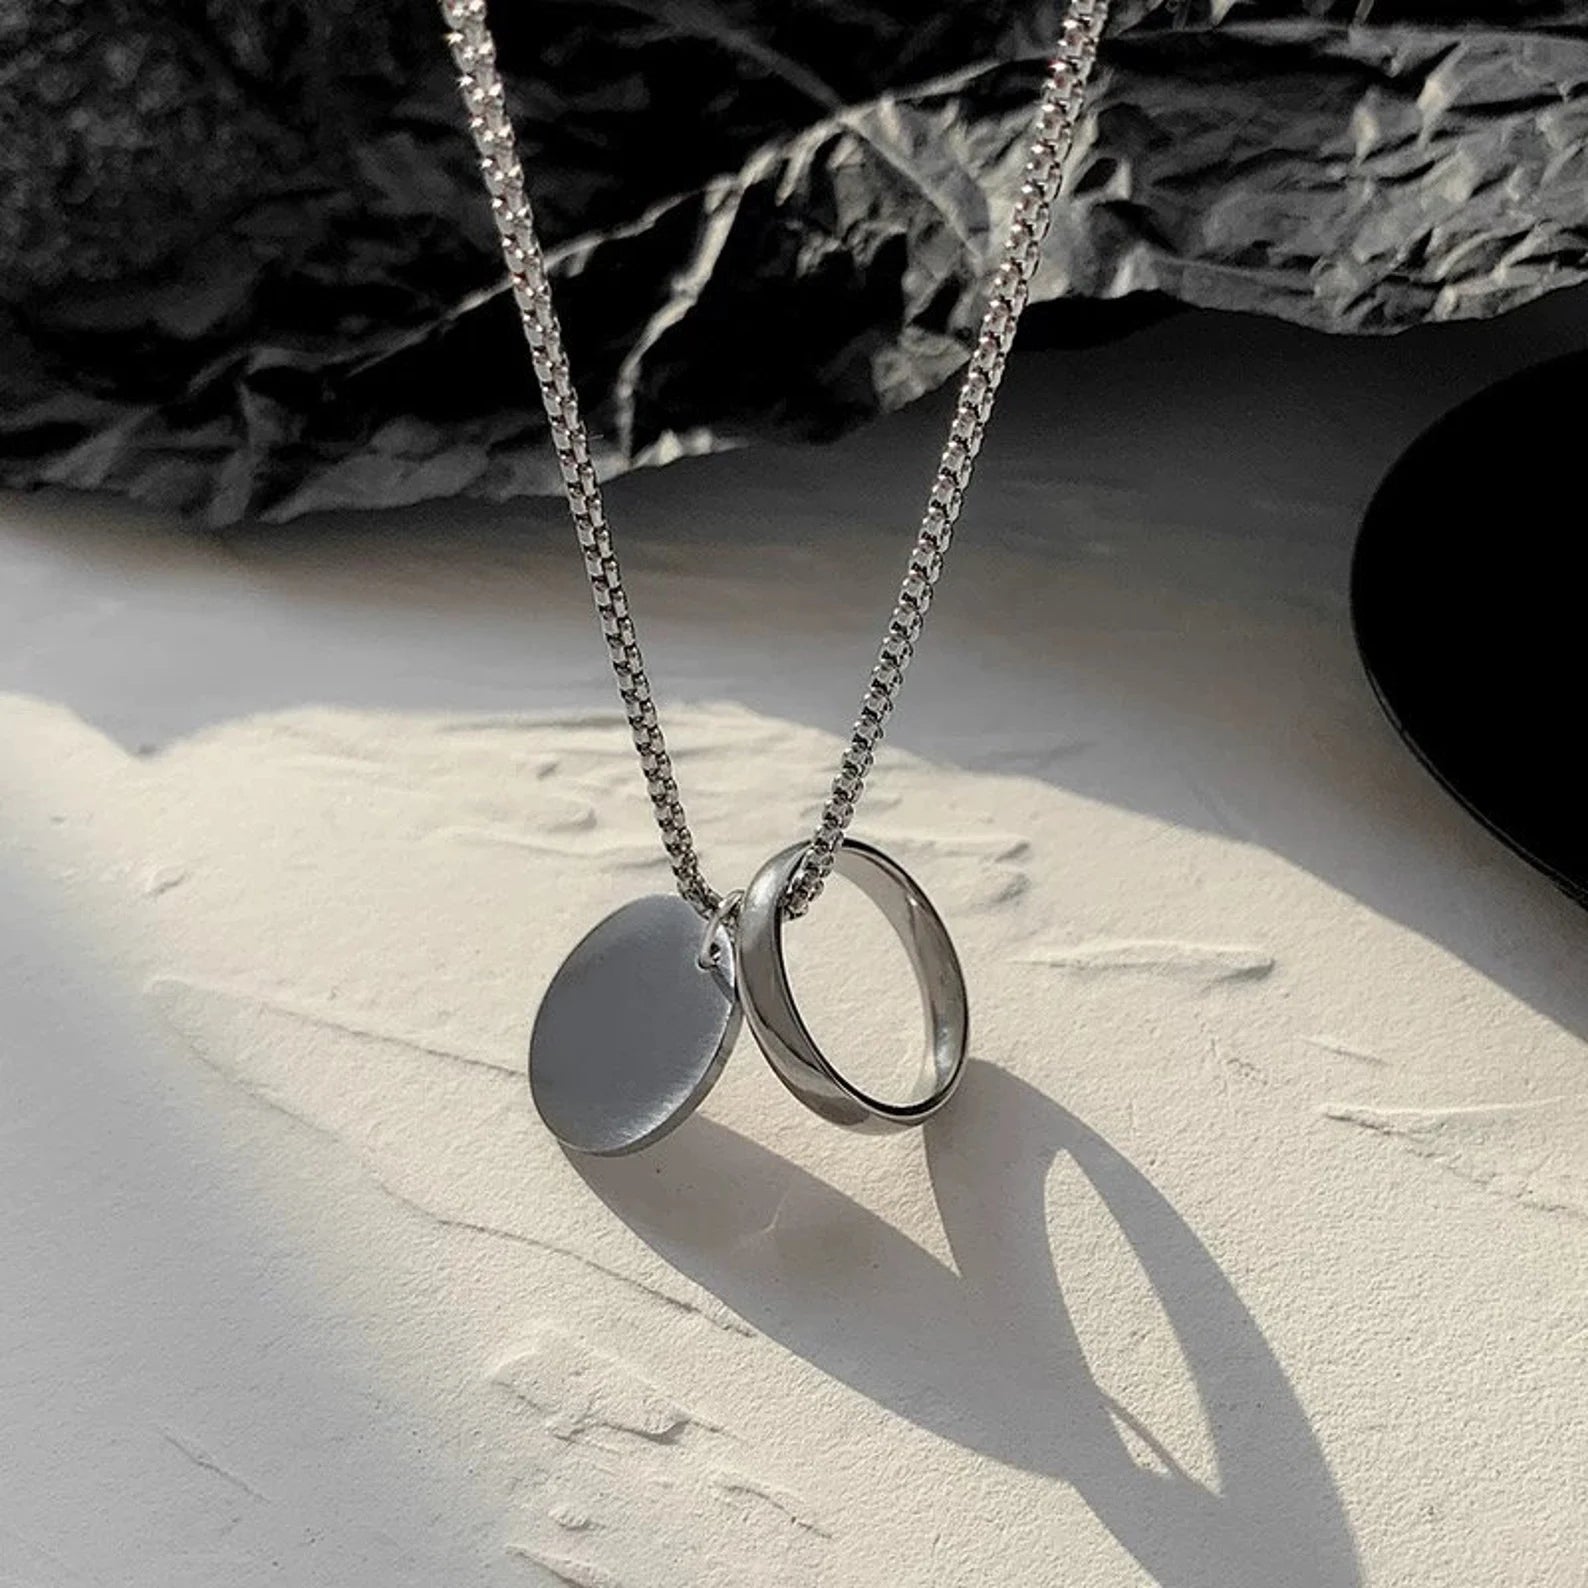 Stainless Steel Chain Necklace Choker with O-Ring Clip